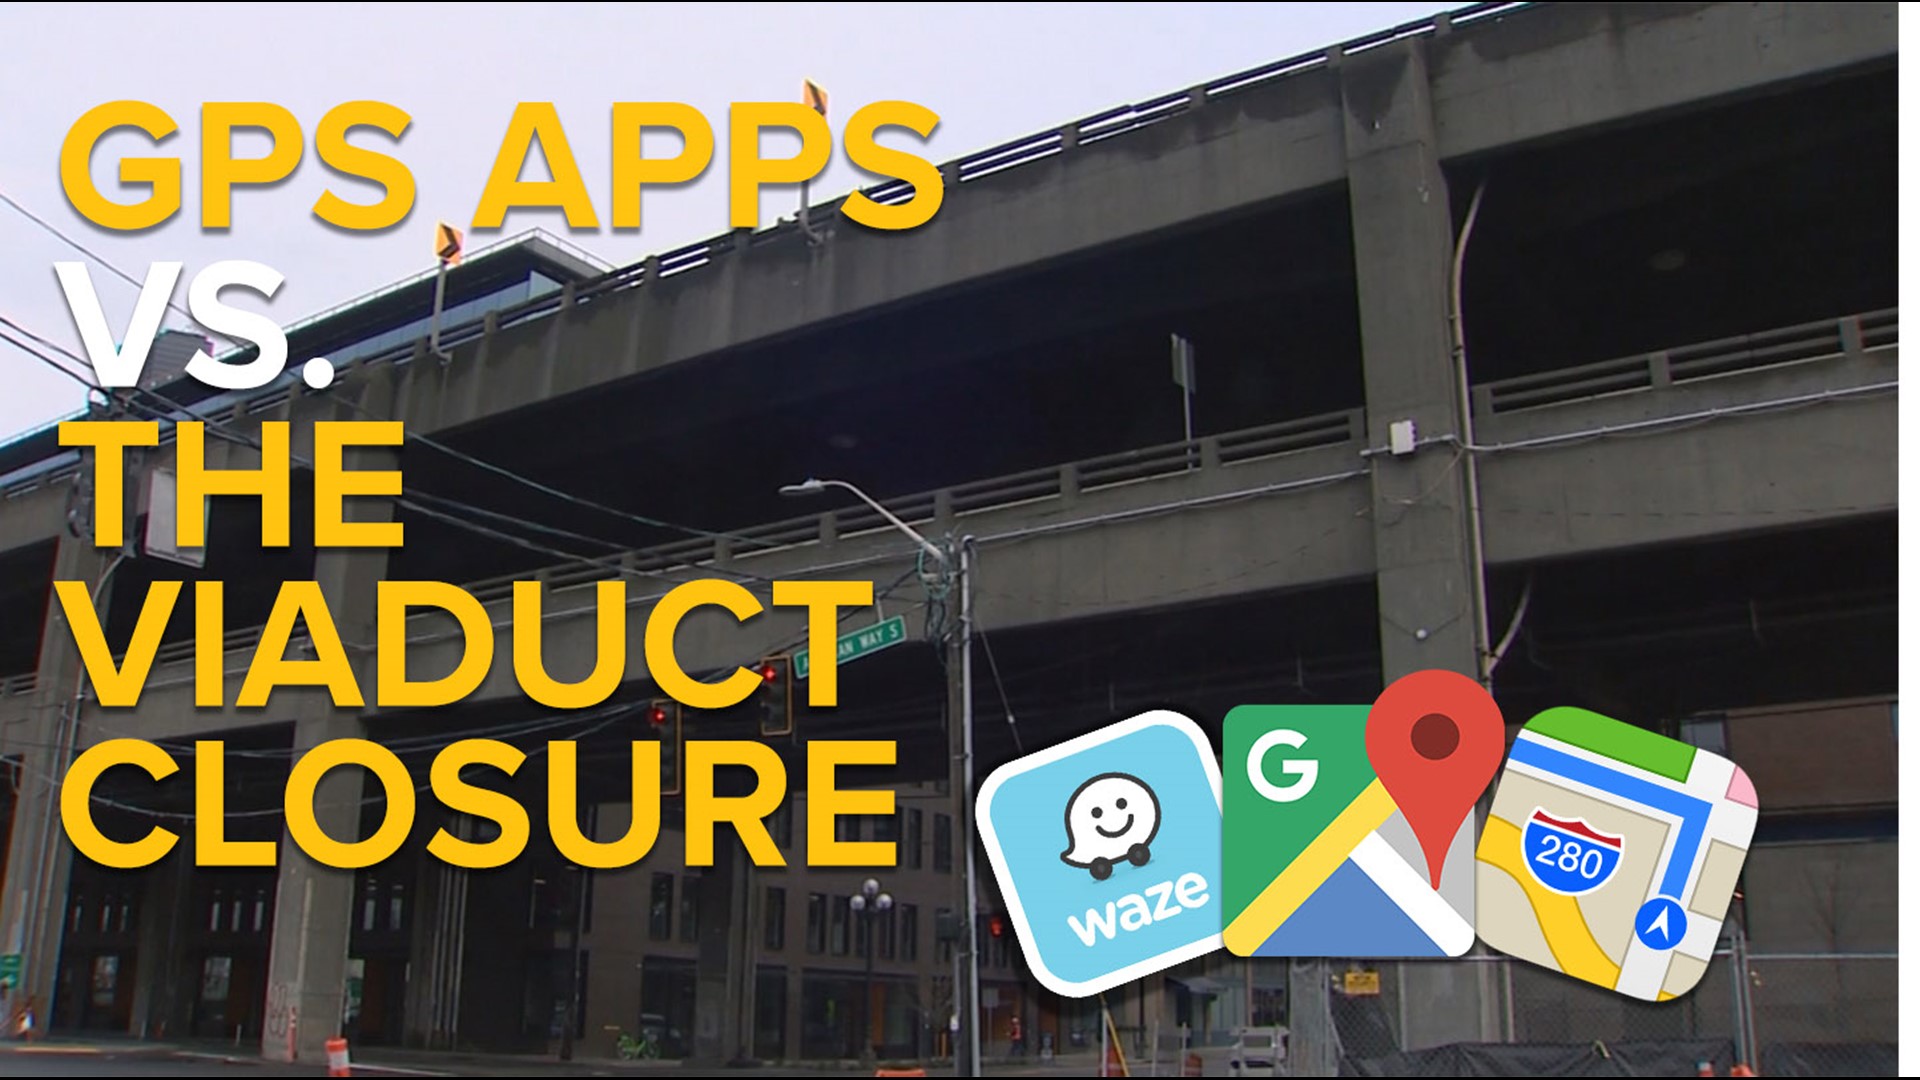 Jake Whittenberg and a couple of KING 5 producers test Waze, Google Maps and Apple Maps to see which one can navigate you around the closure best.